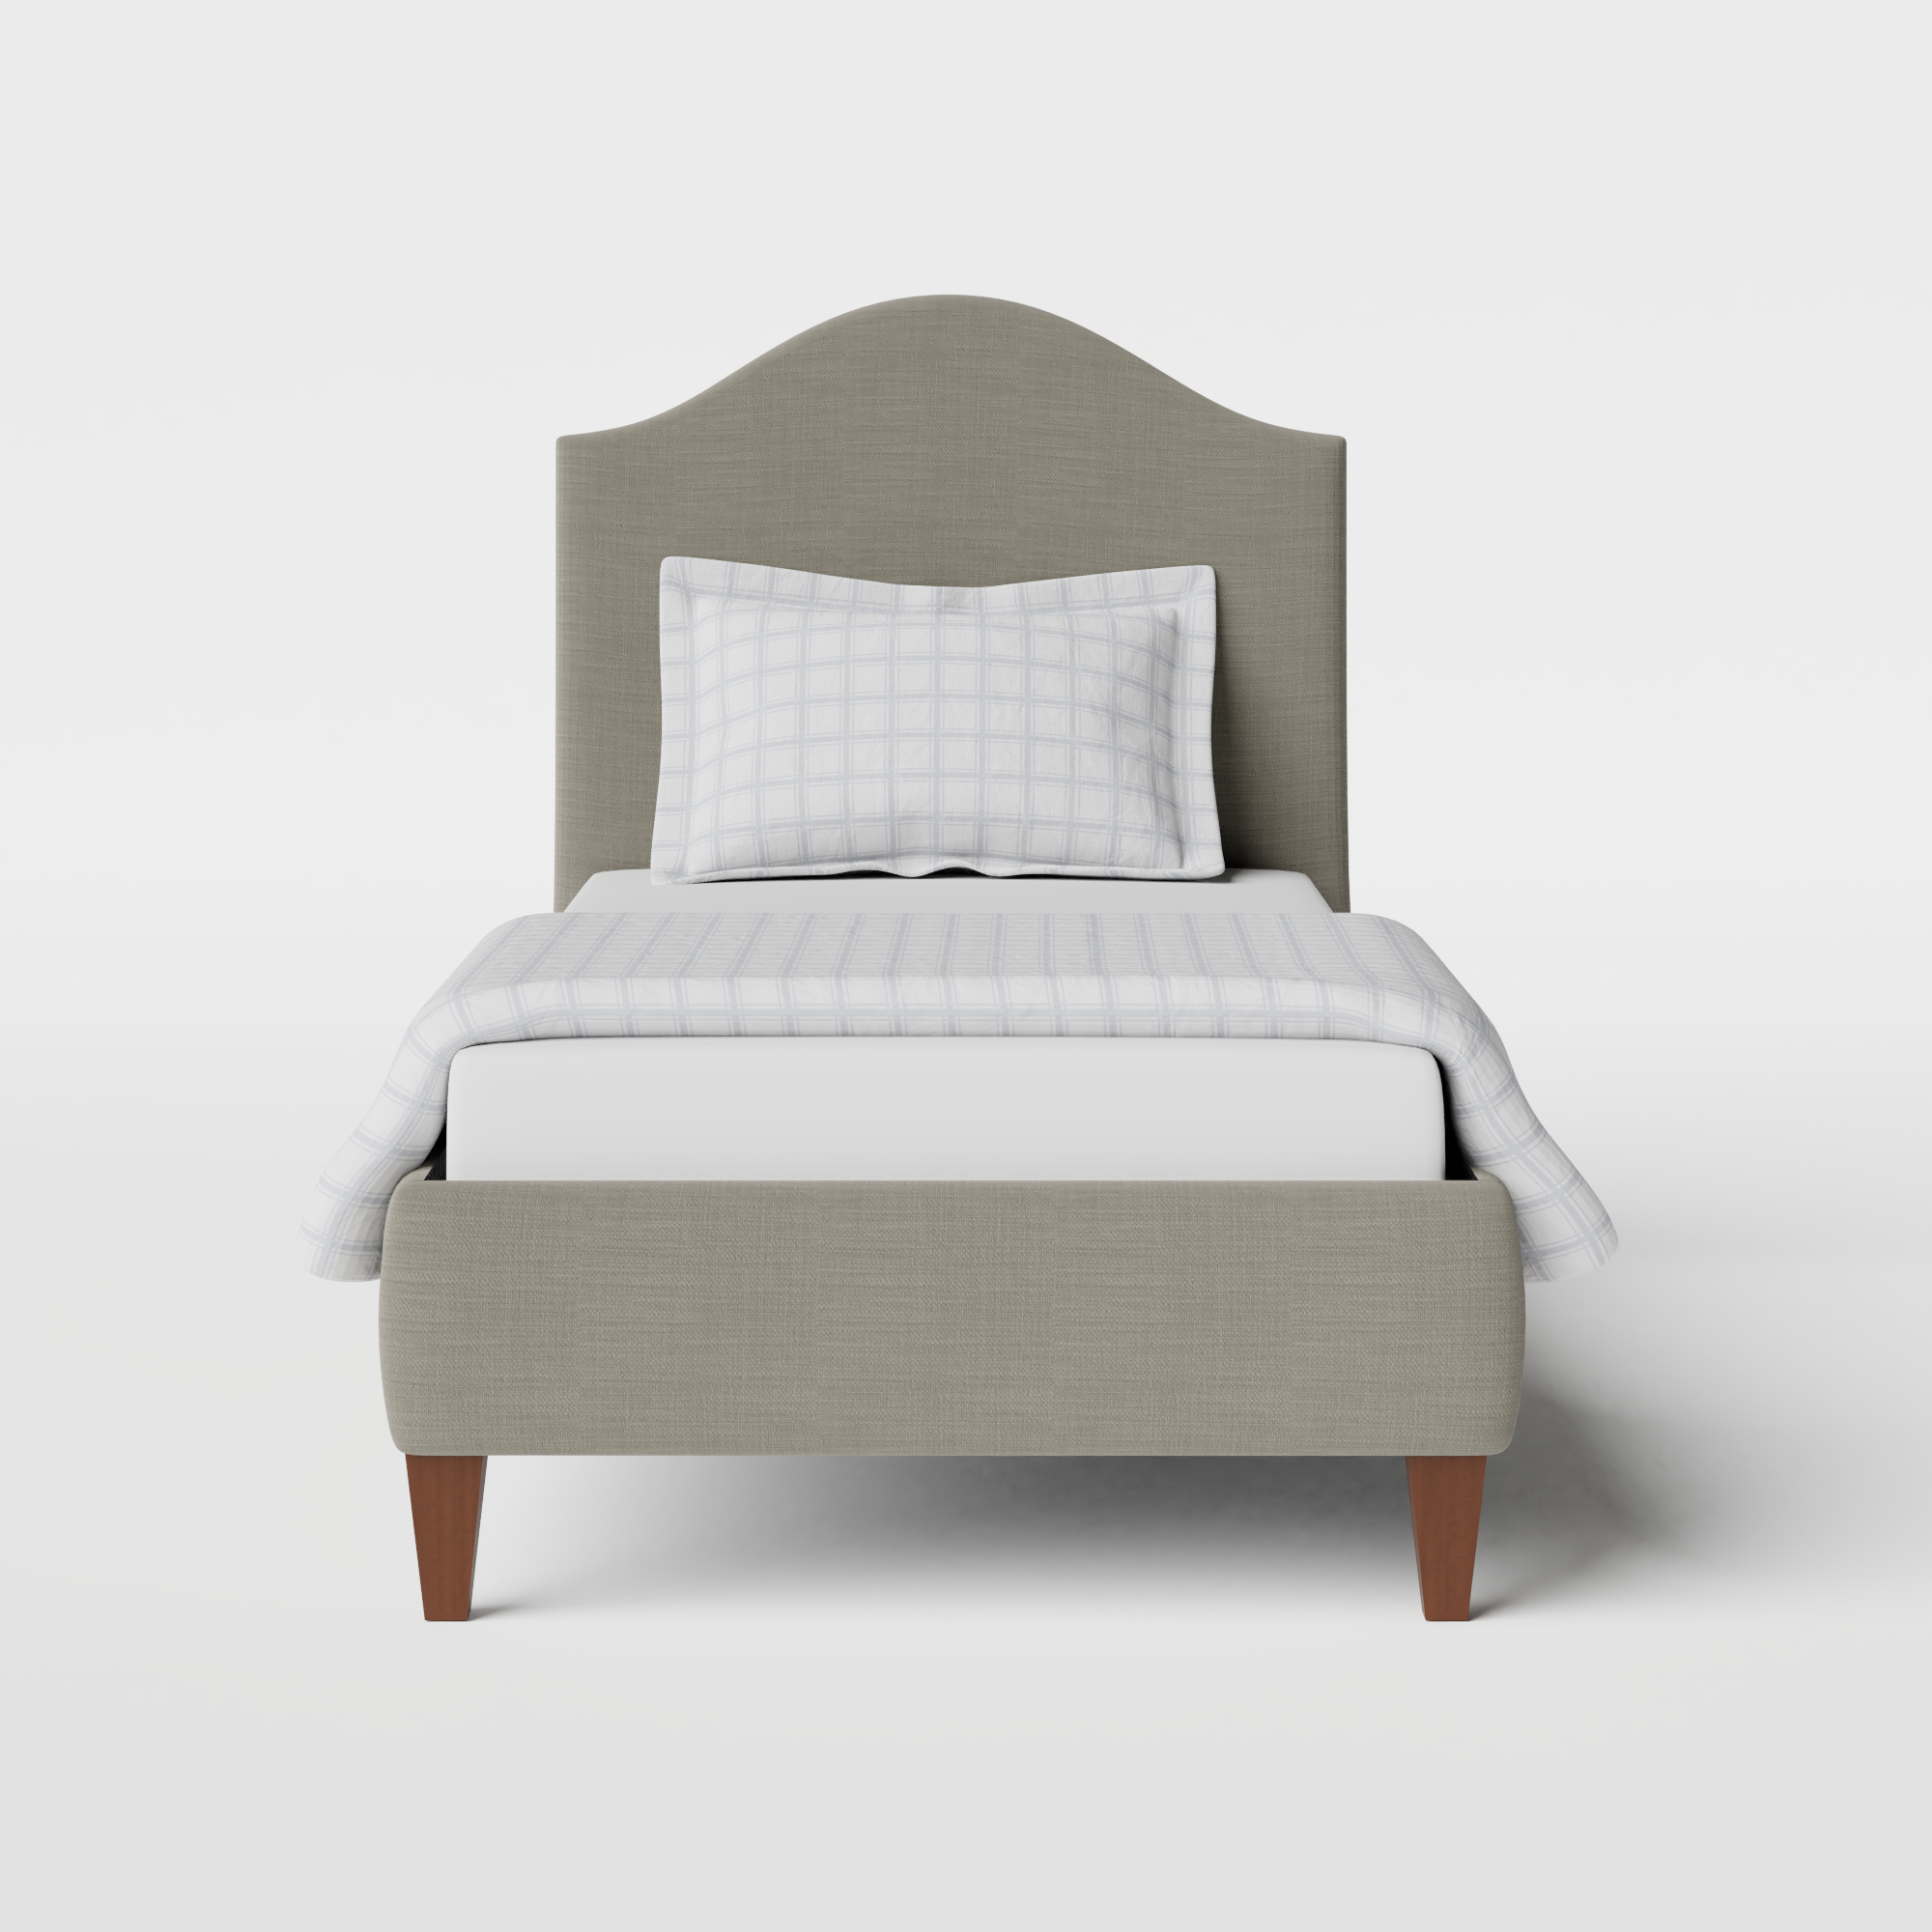 Daniella upholstered single bed in grey fabric